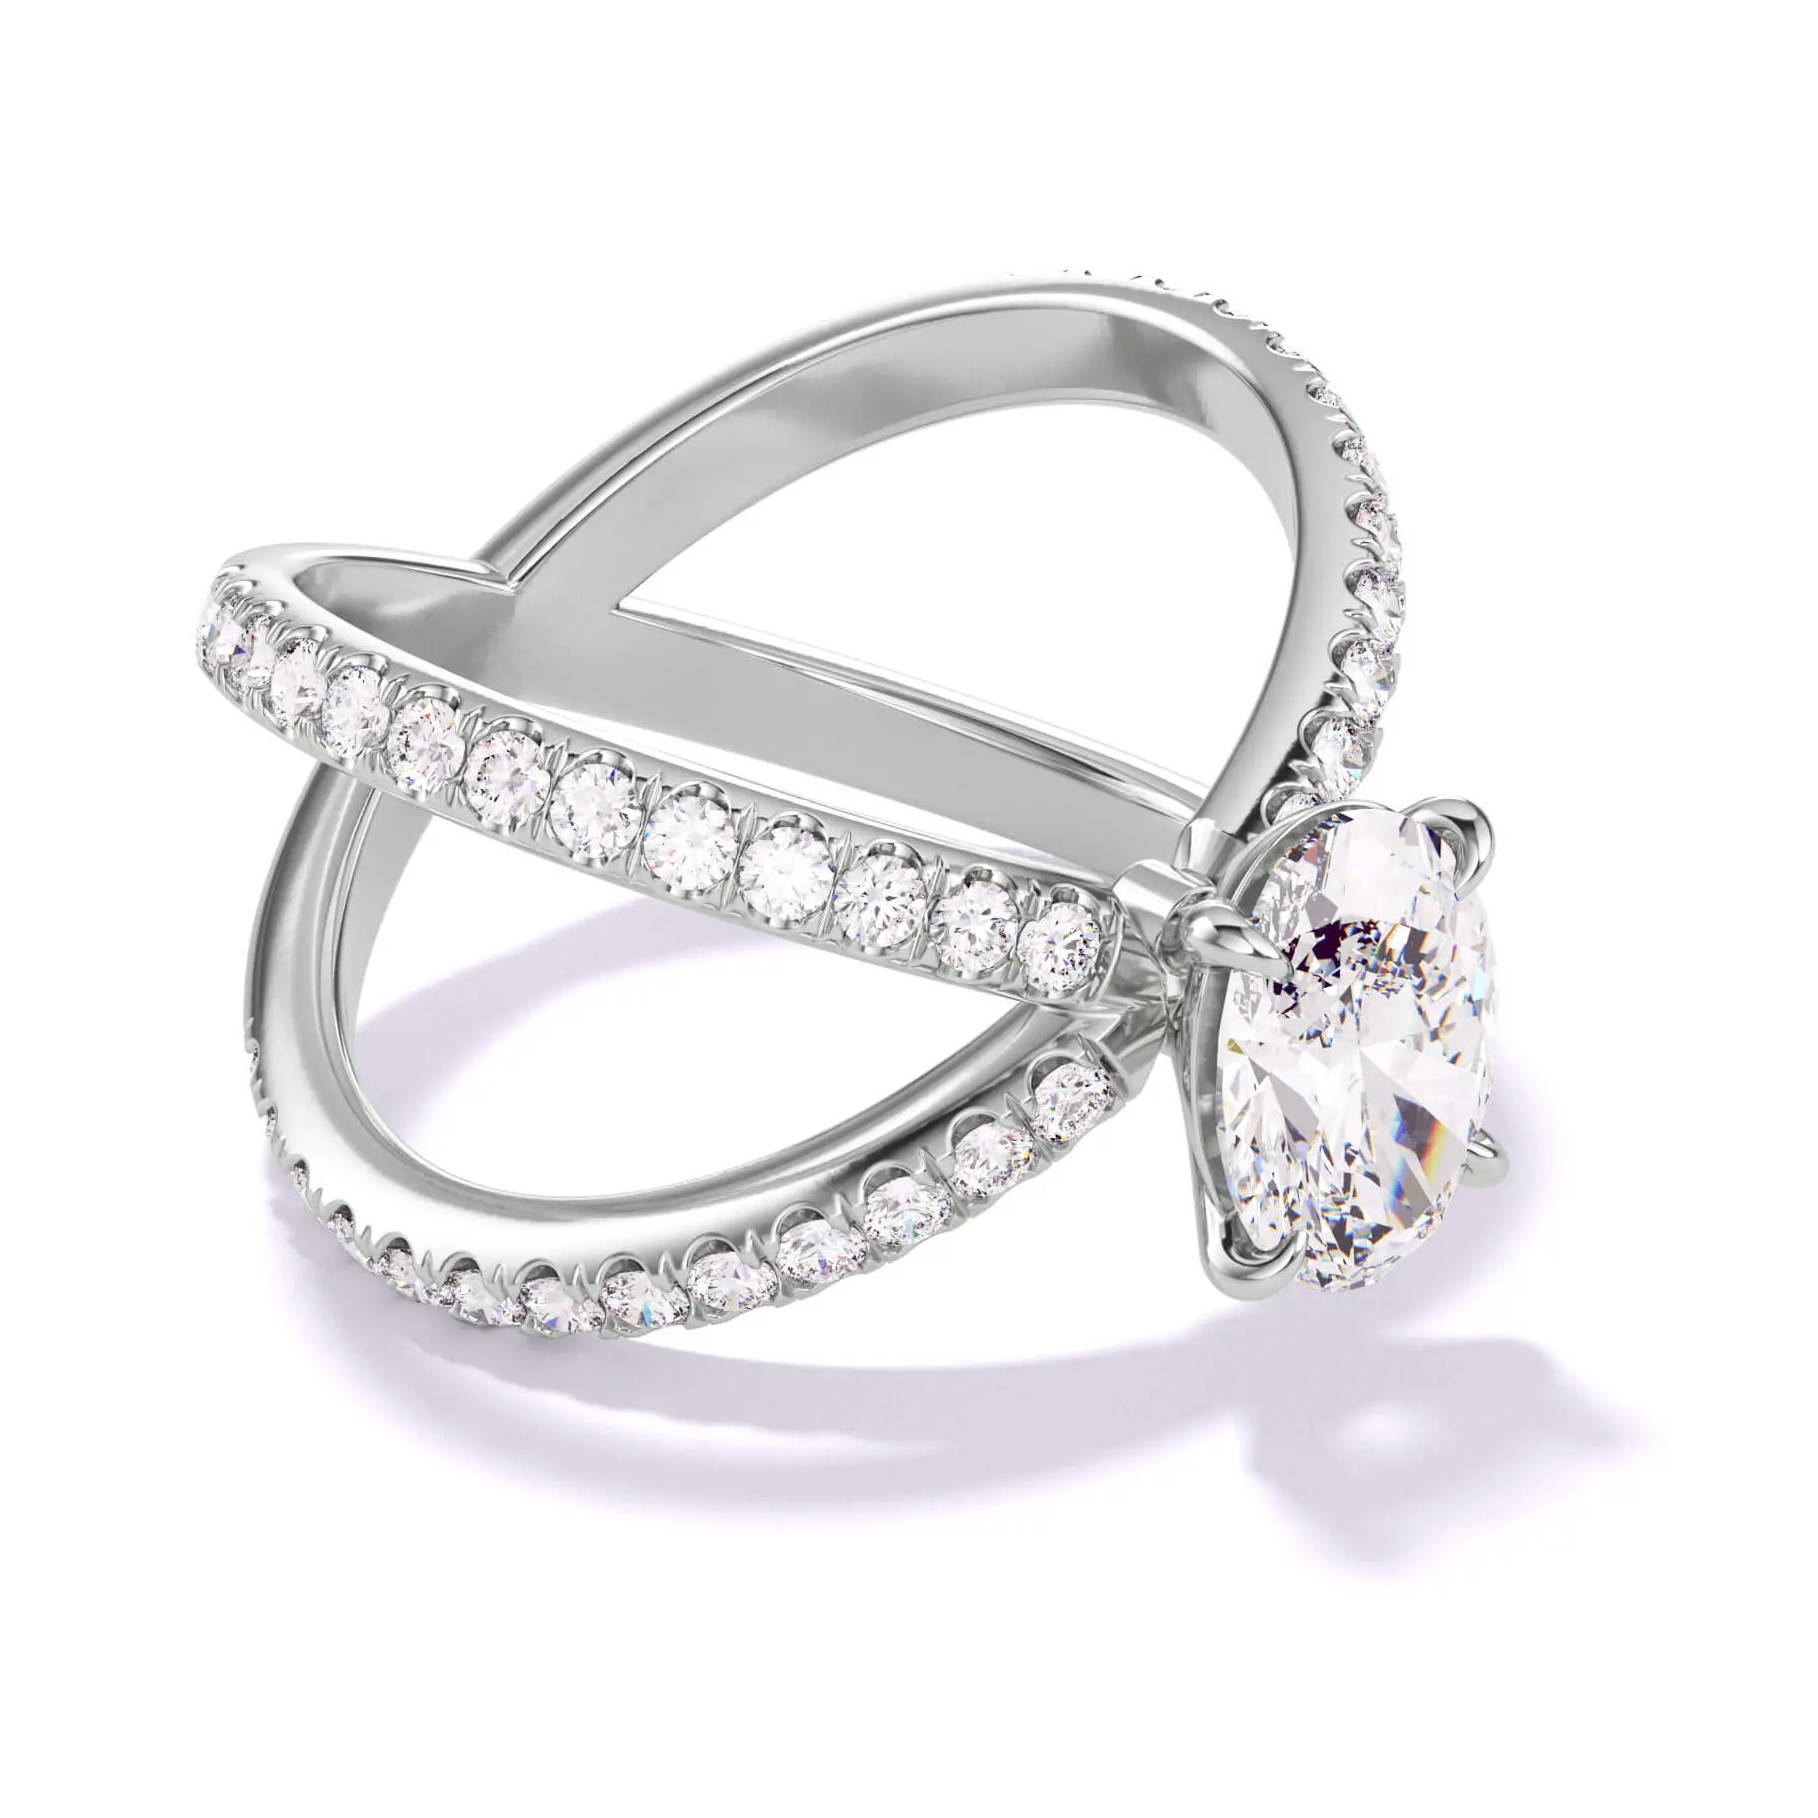 $10,000 diamond engagement ring - oval with a pave axis band in platinum 